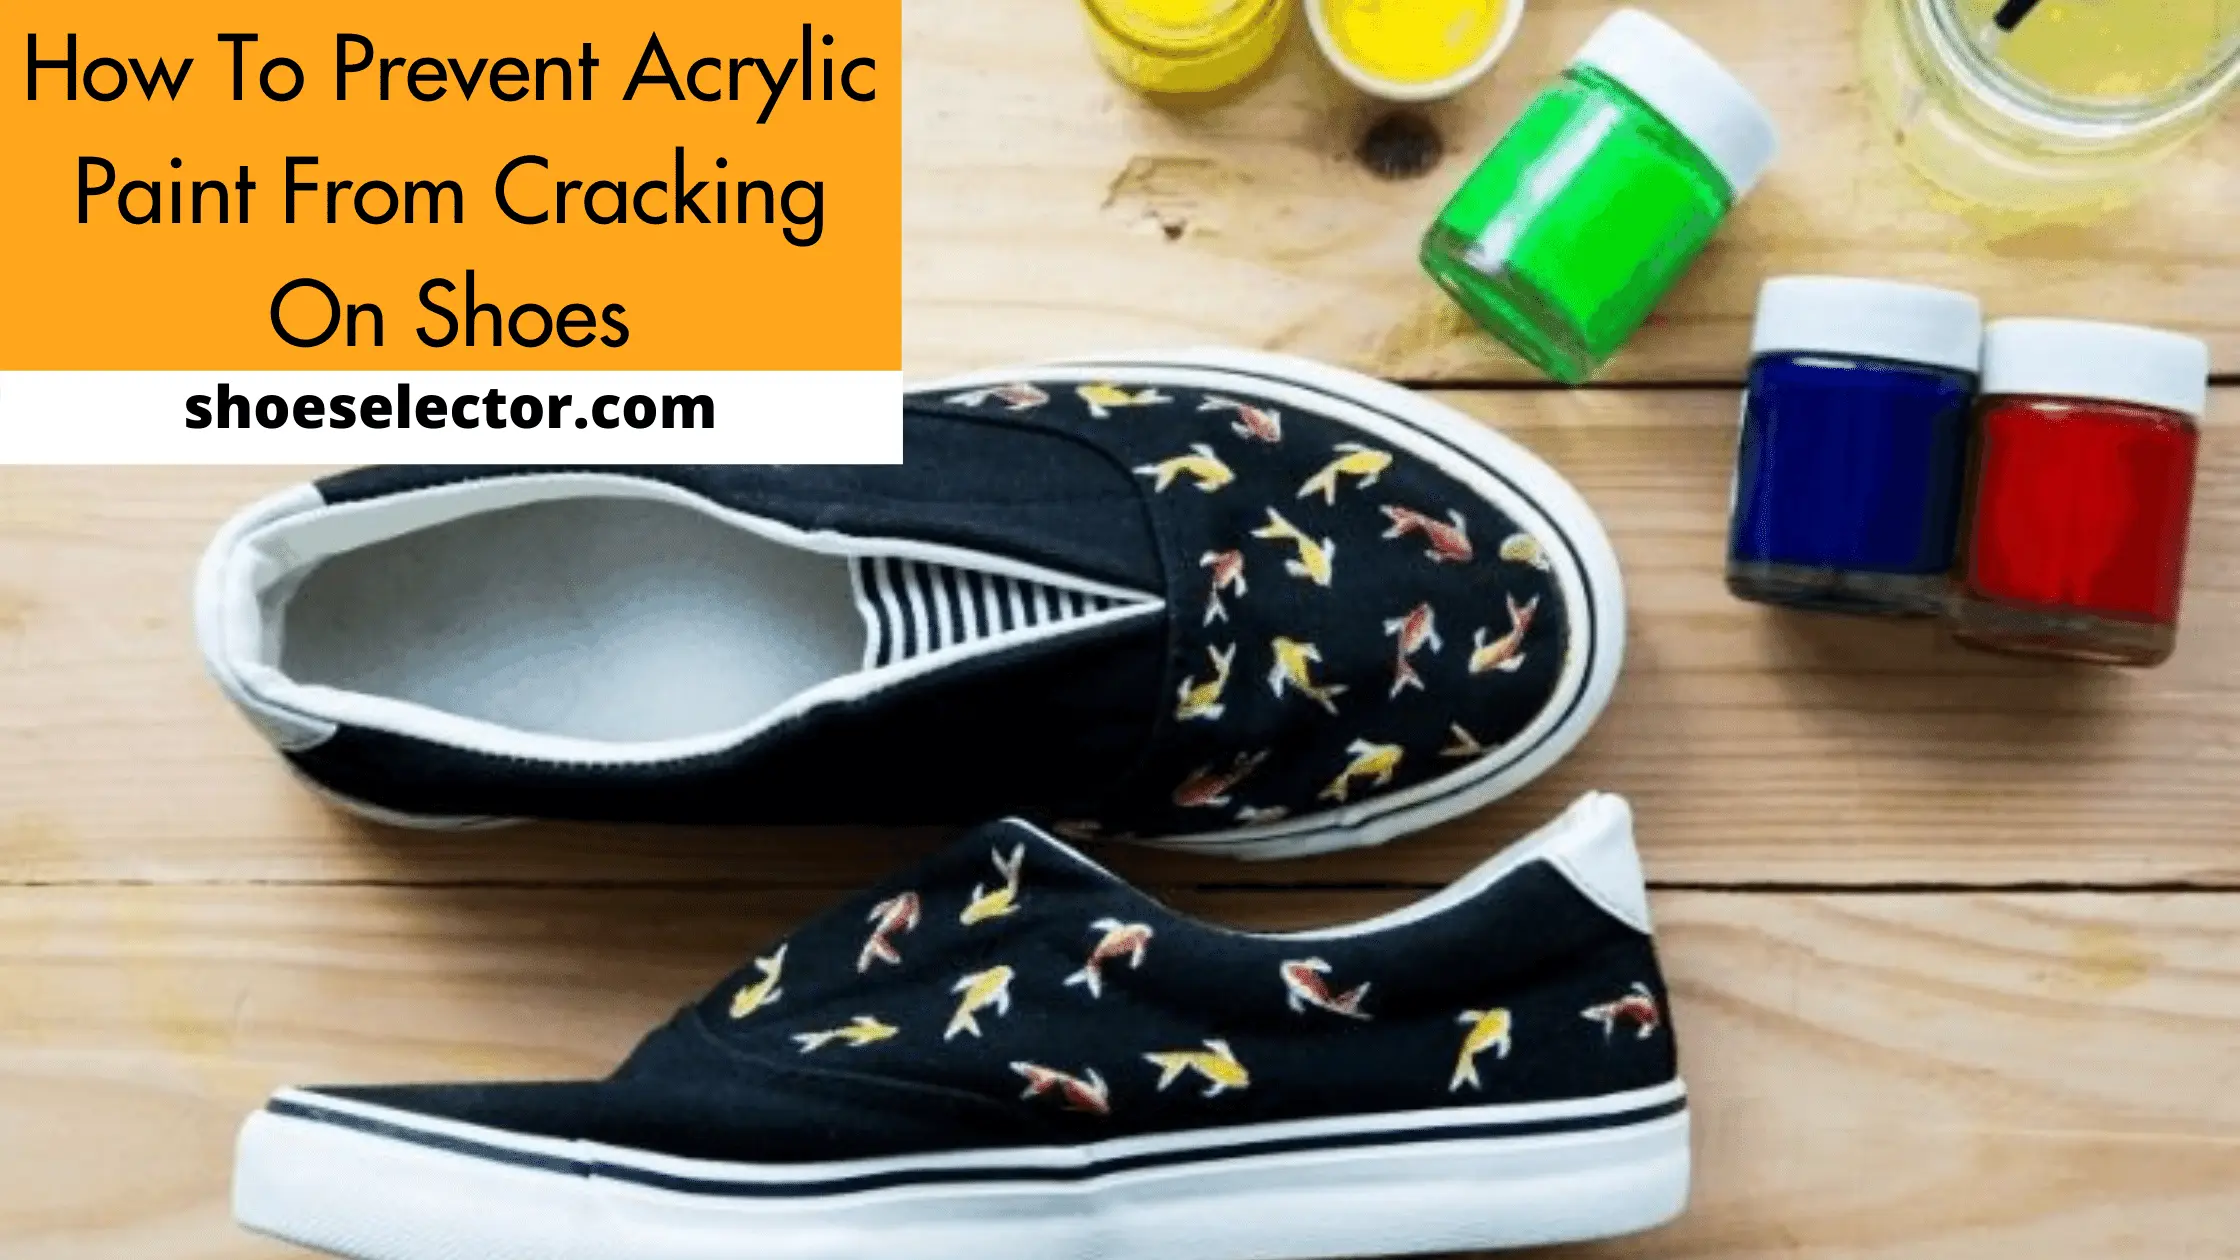 How To Prevent Acrylic Paint From Cracking On Shoes? - #1 Guide